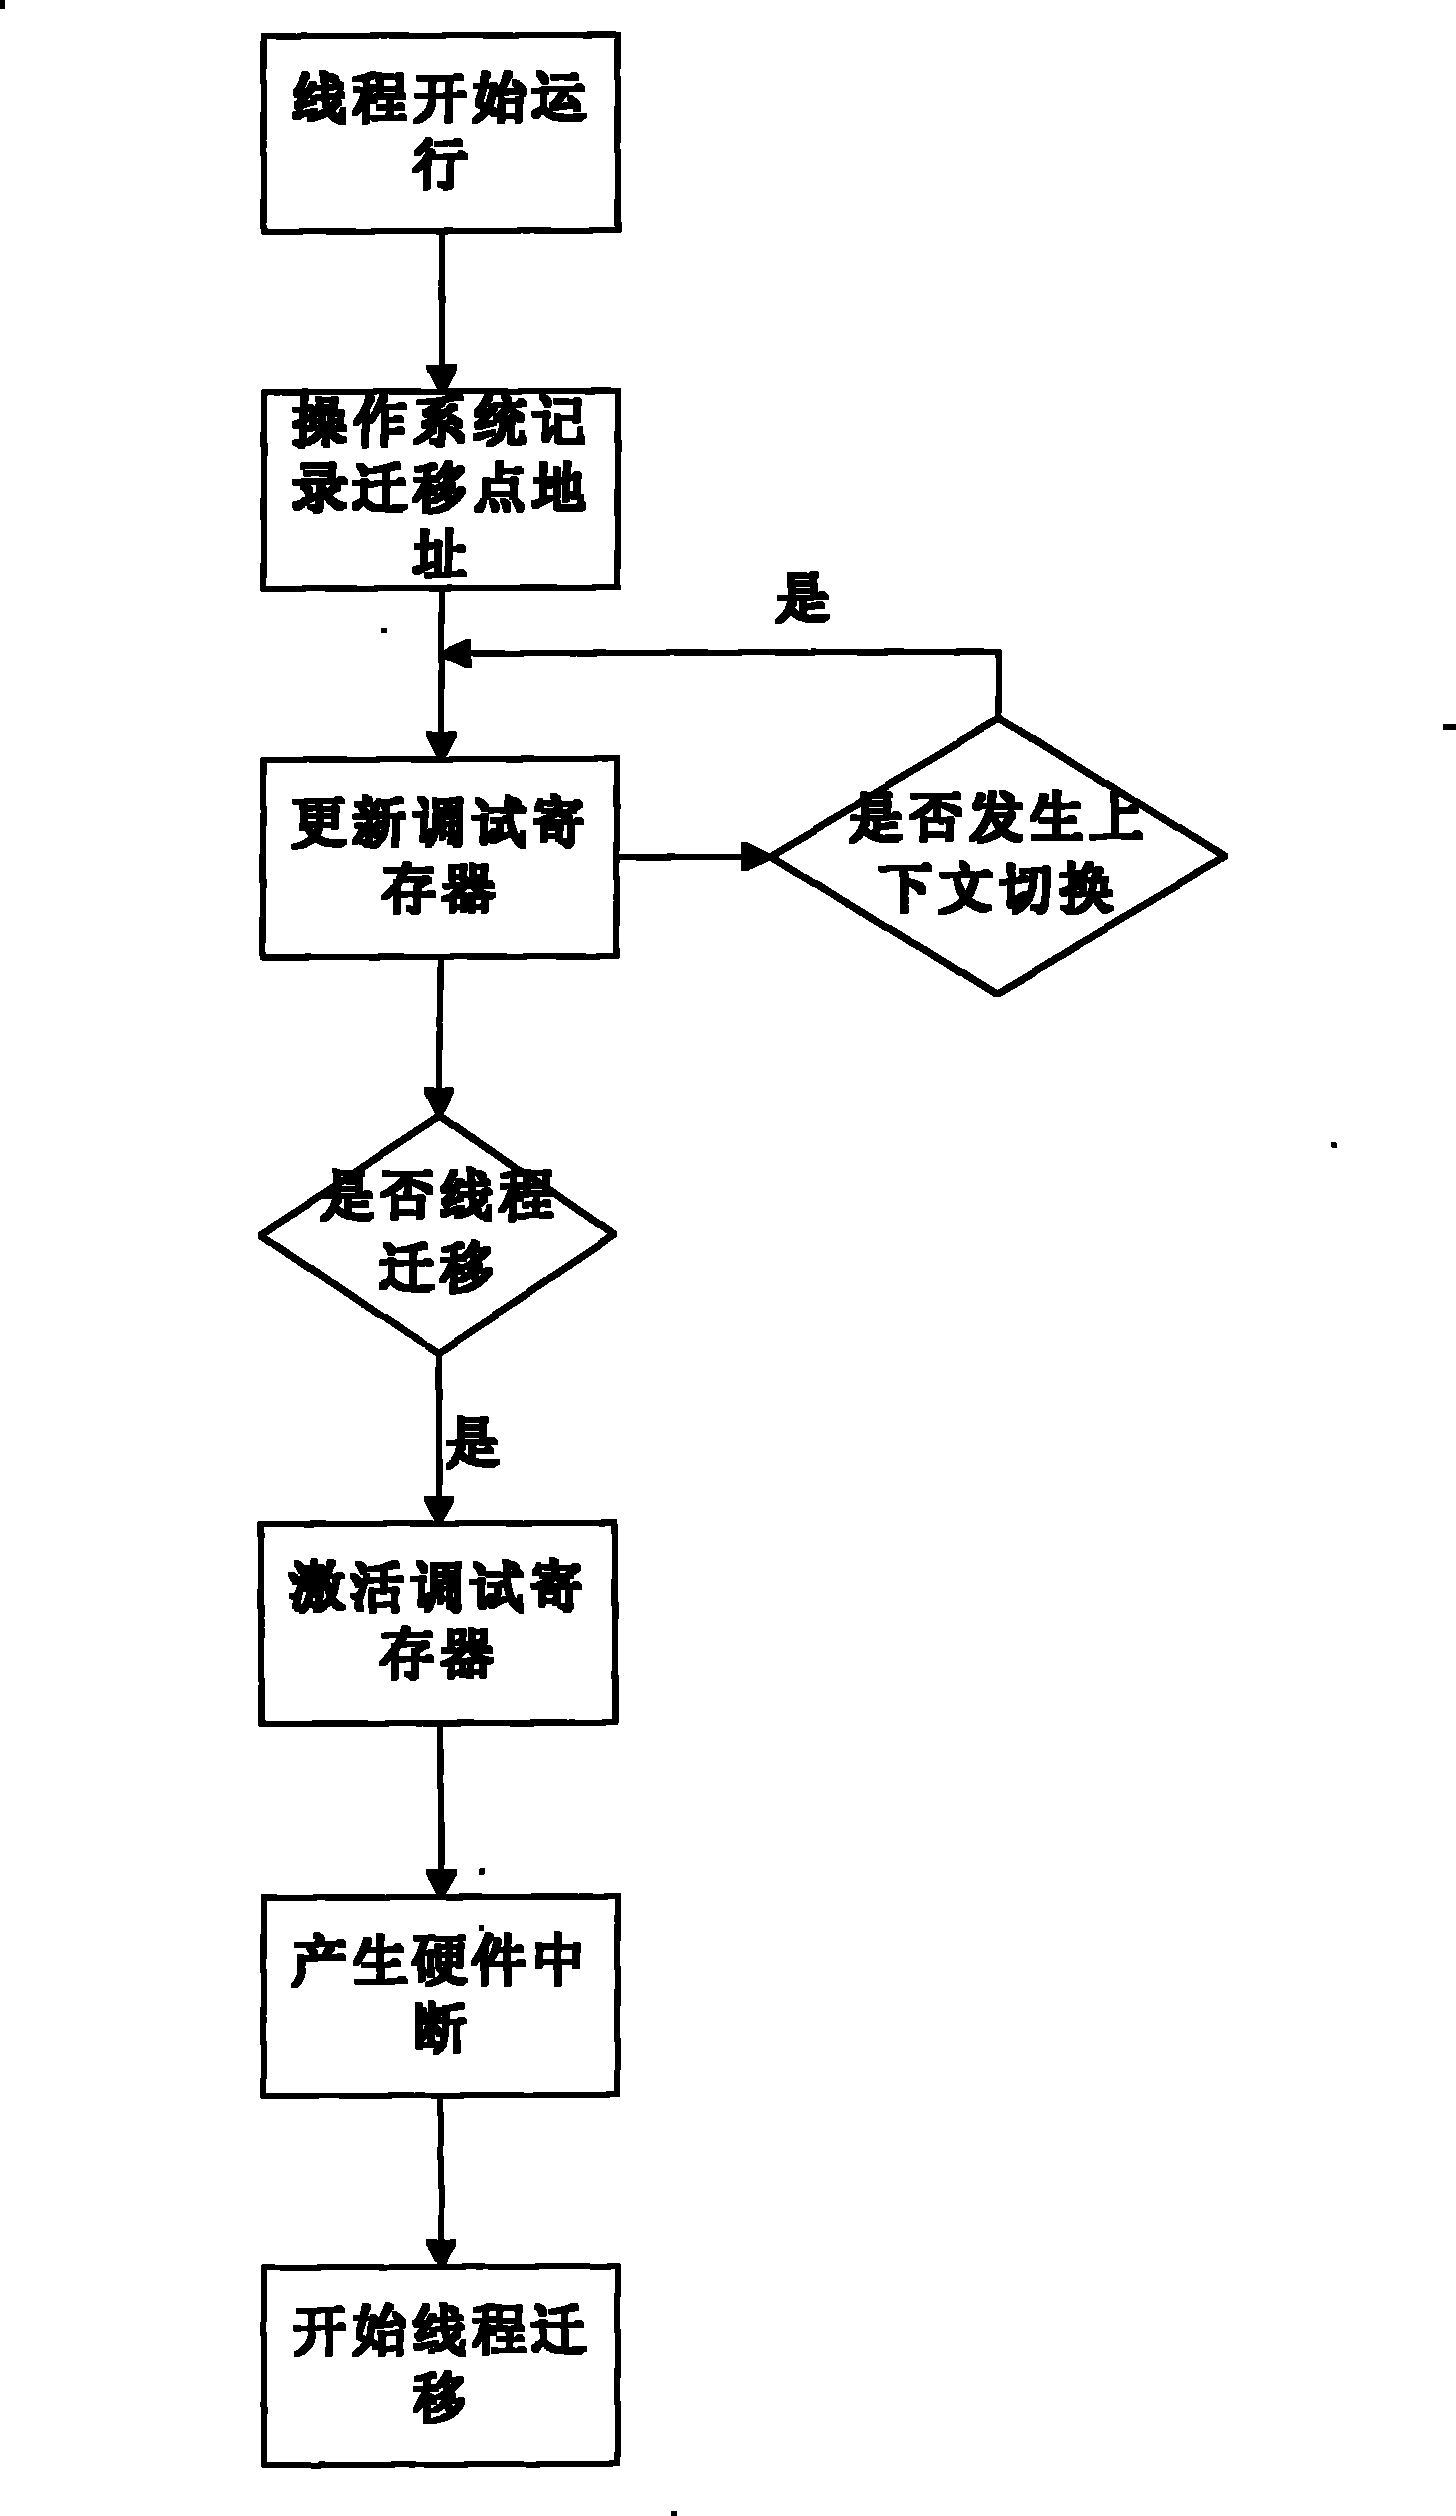 Multi-core processor oriented real-time thread migration method